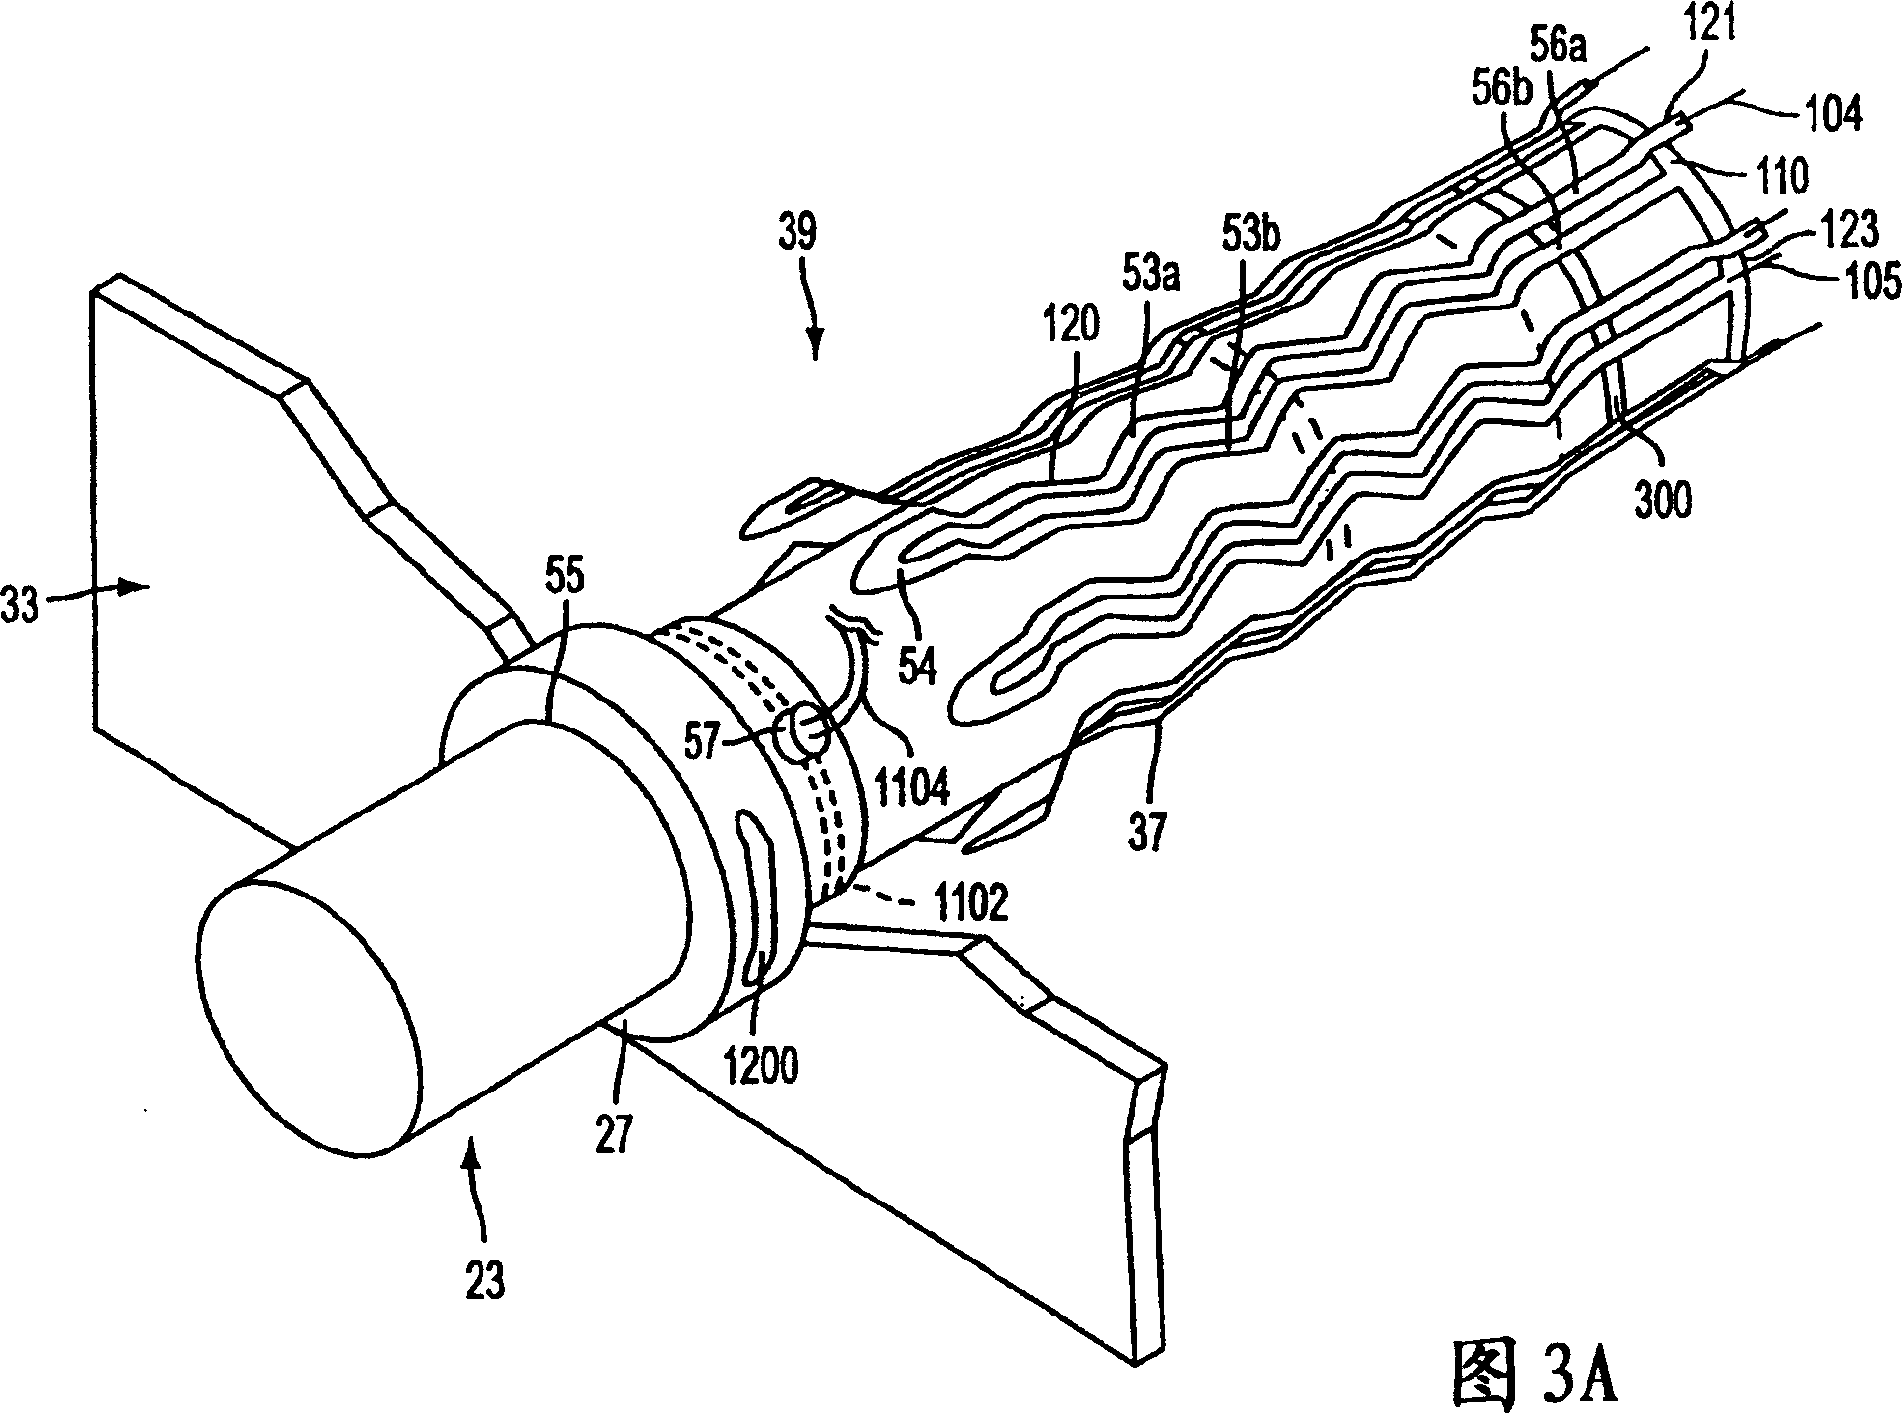 Electrical smoking system and method